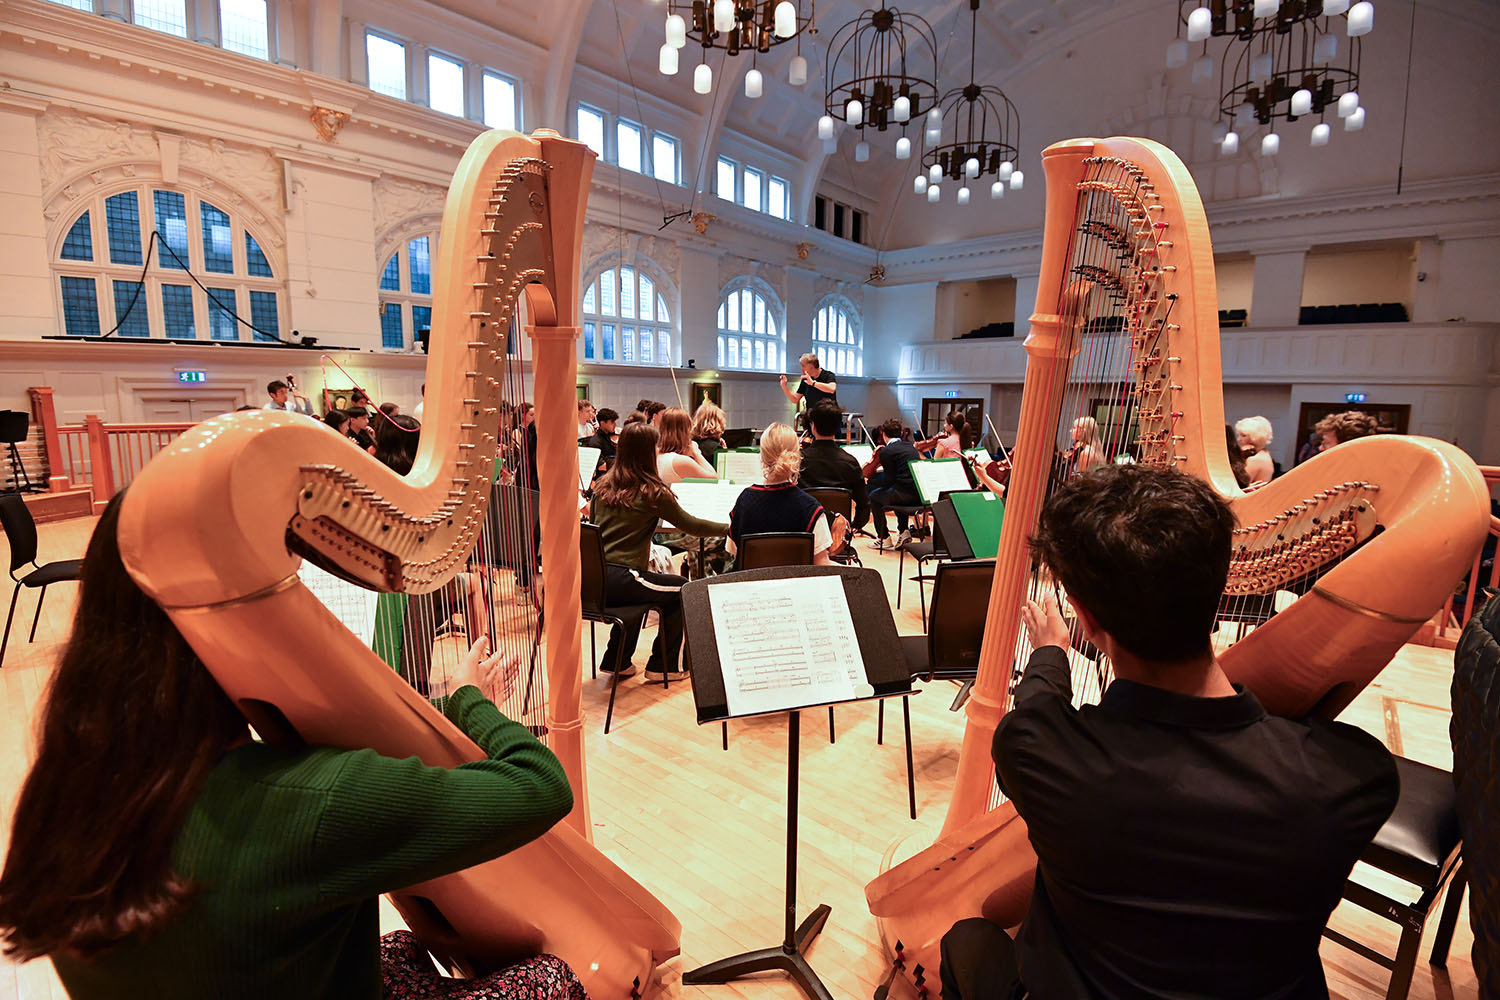 Harpists on stage in the Amaryllis Fleming Concert Hall